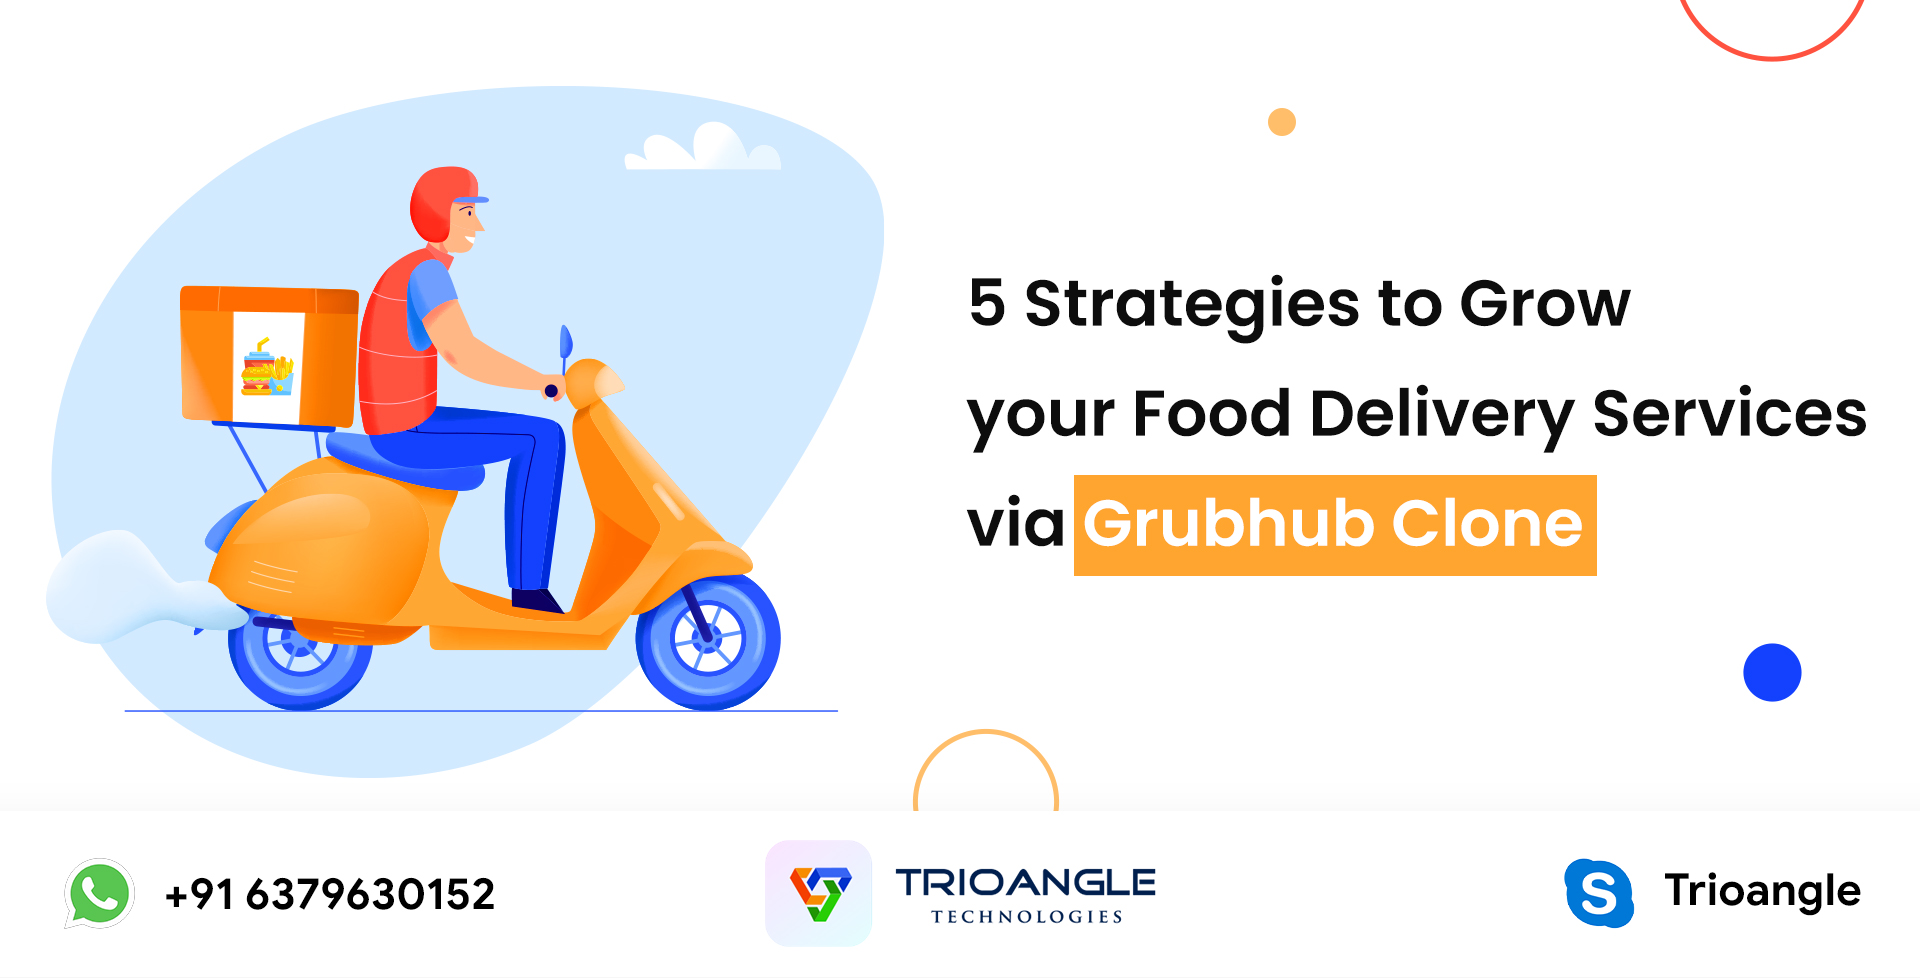 5 Strategies to Grow your Food Delivery Services via Grubhub Clone